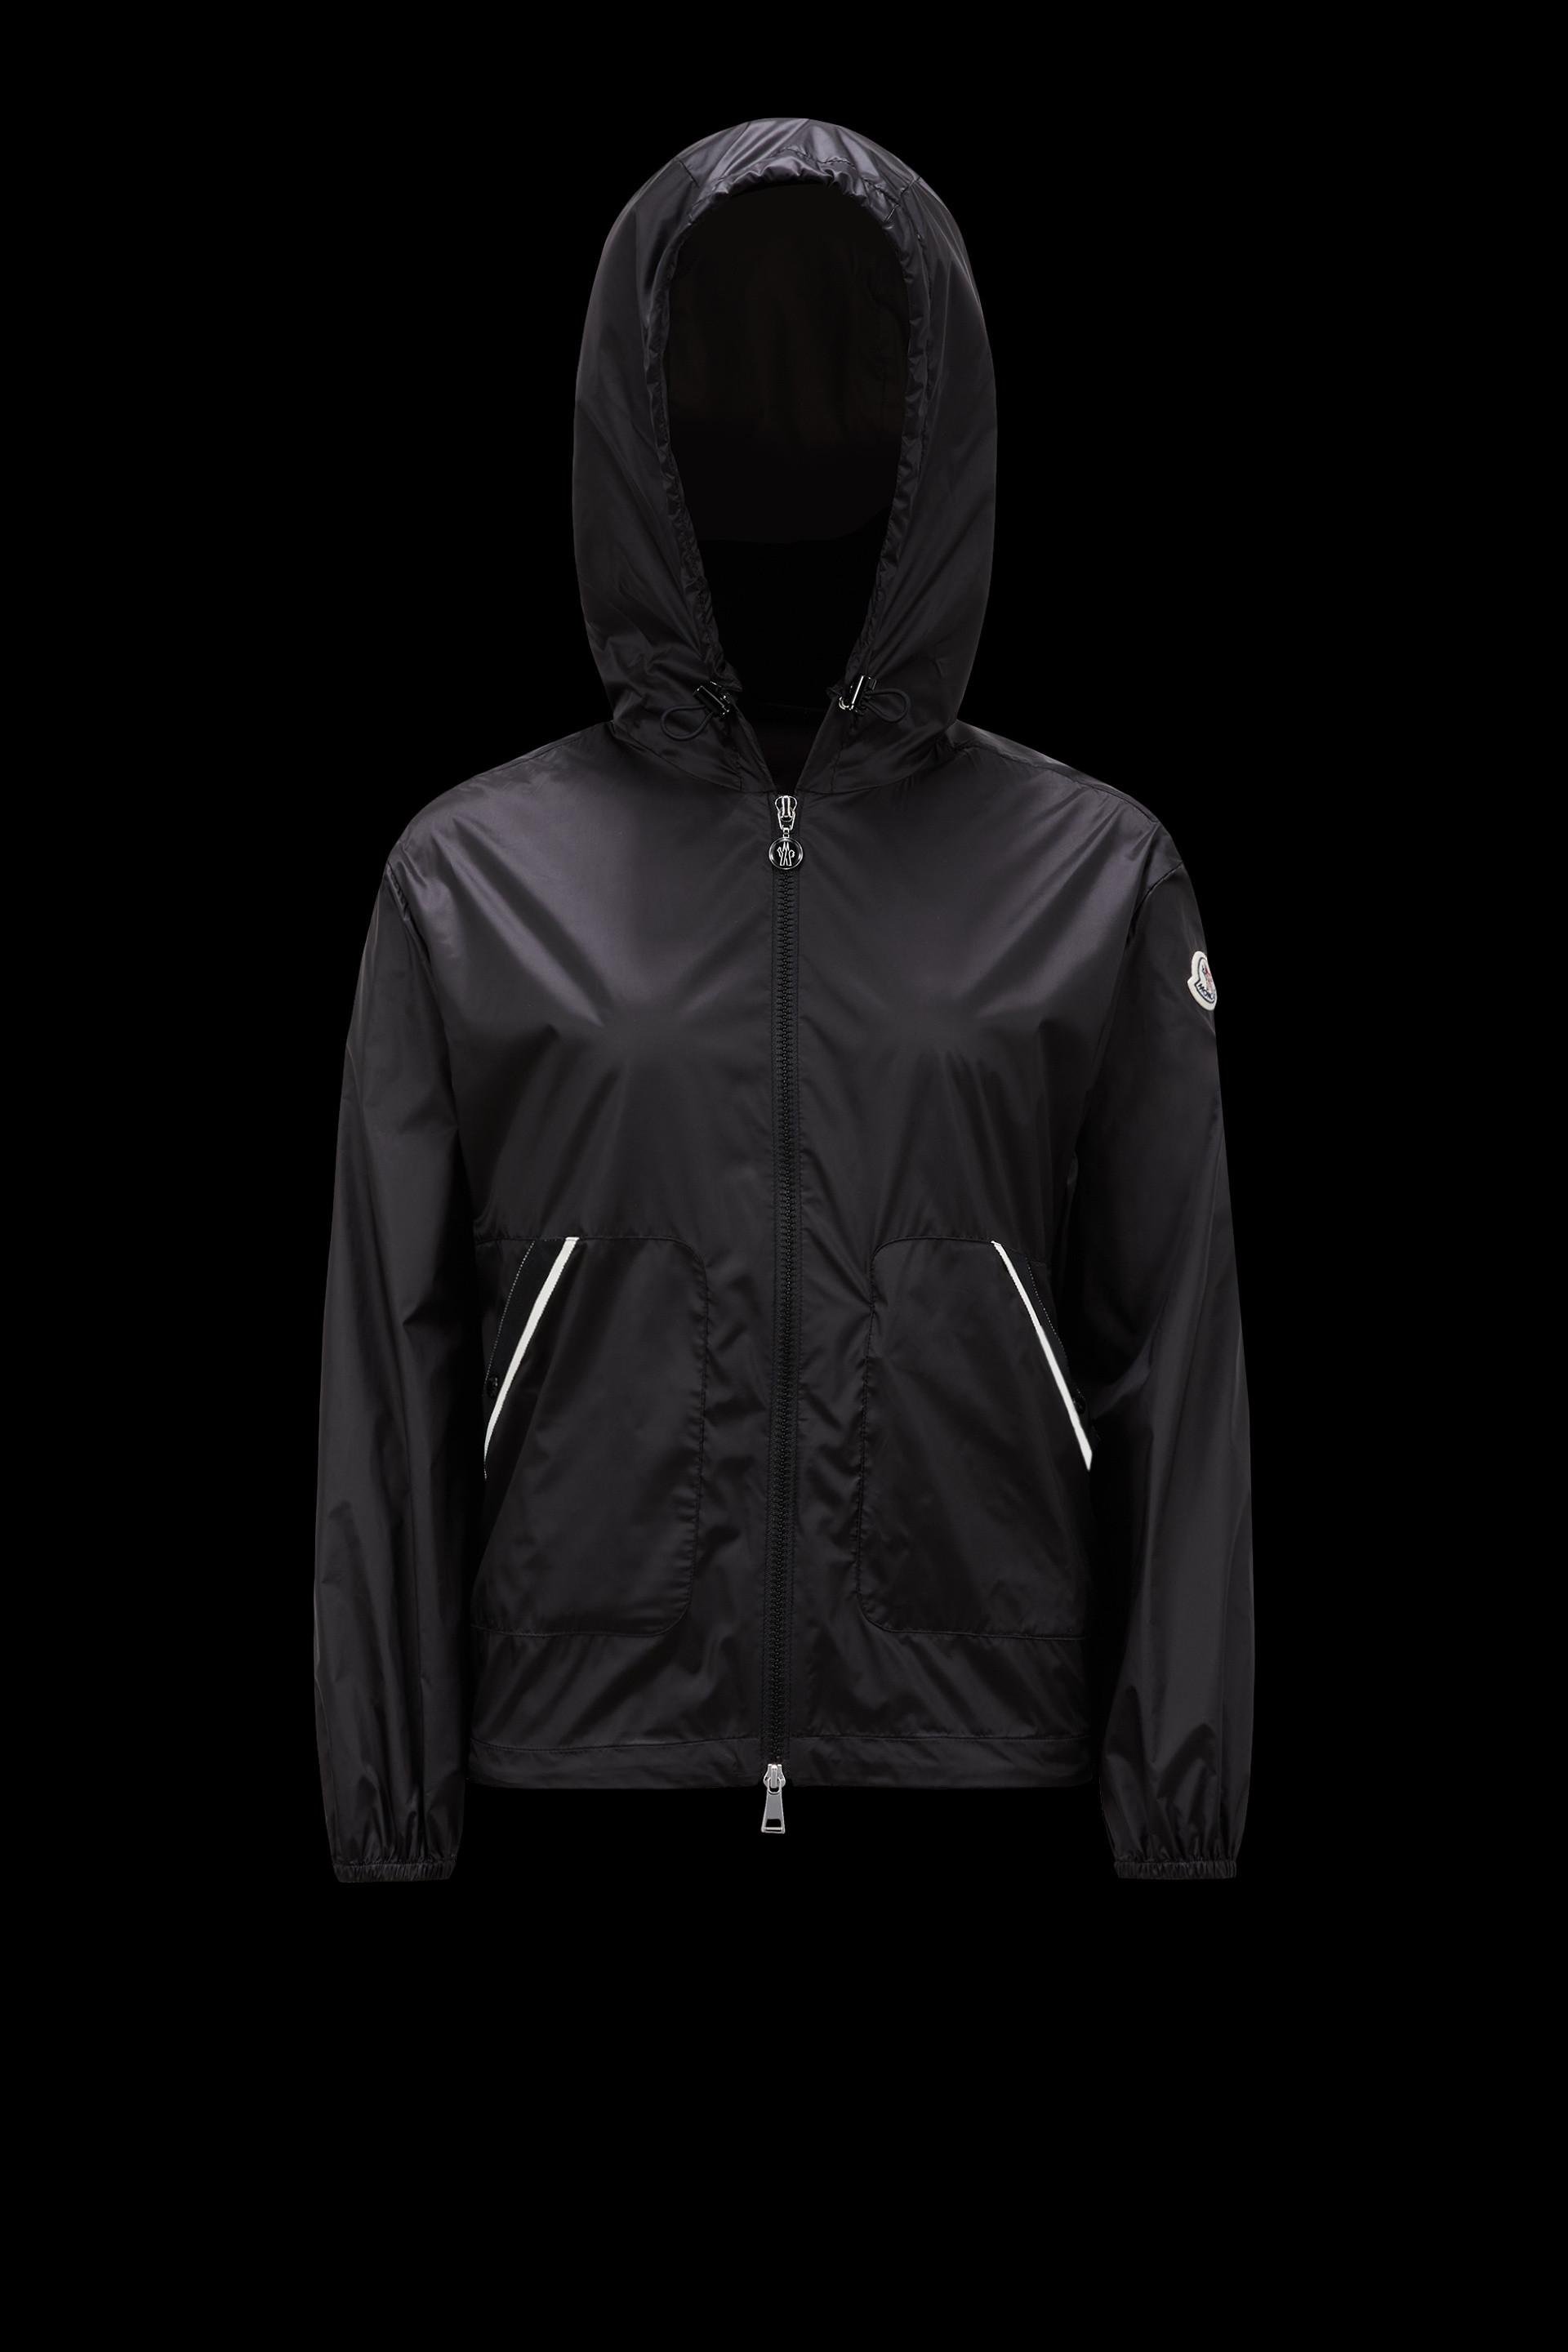 Filiria Hooded Jacket by MONCLER